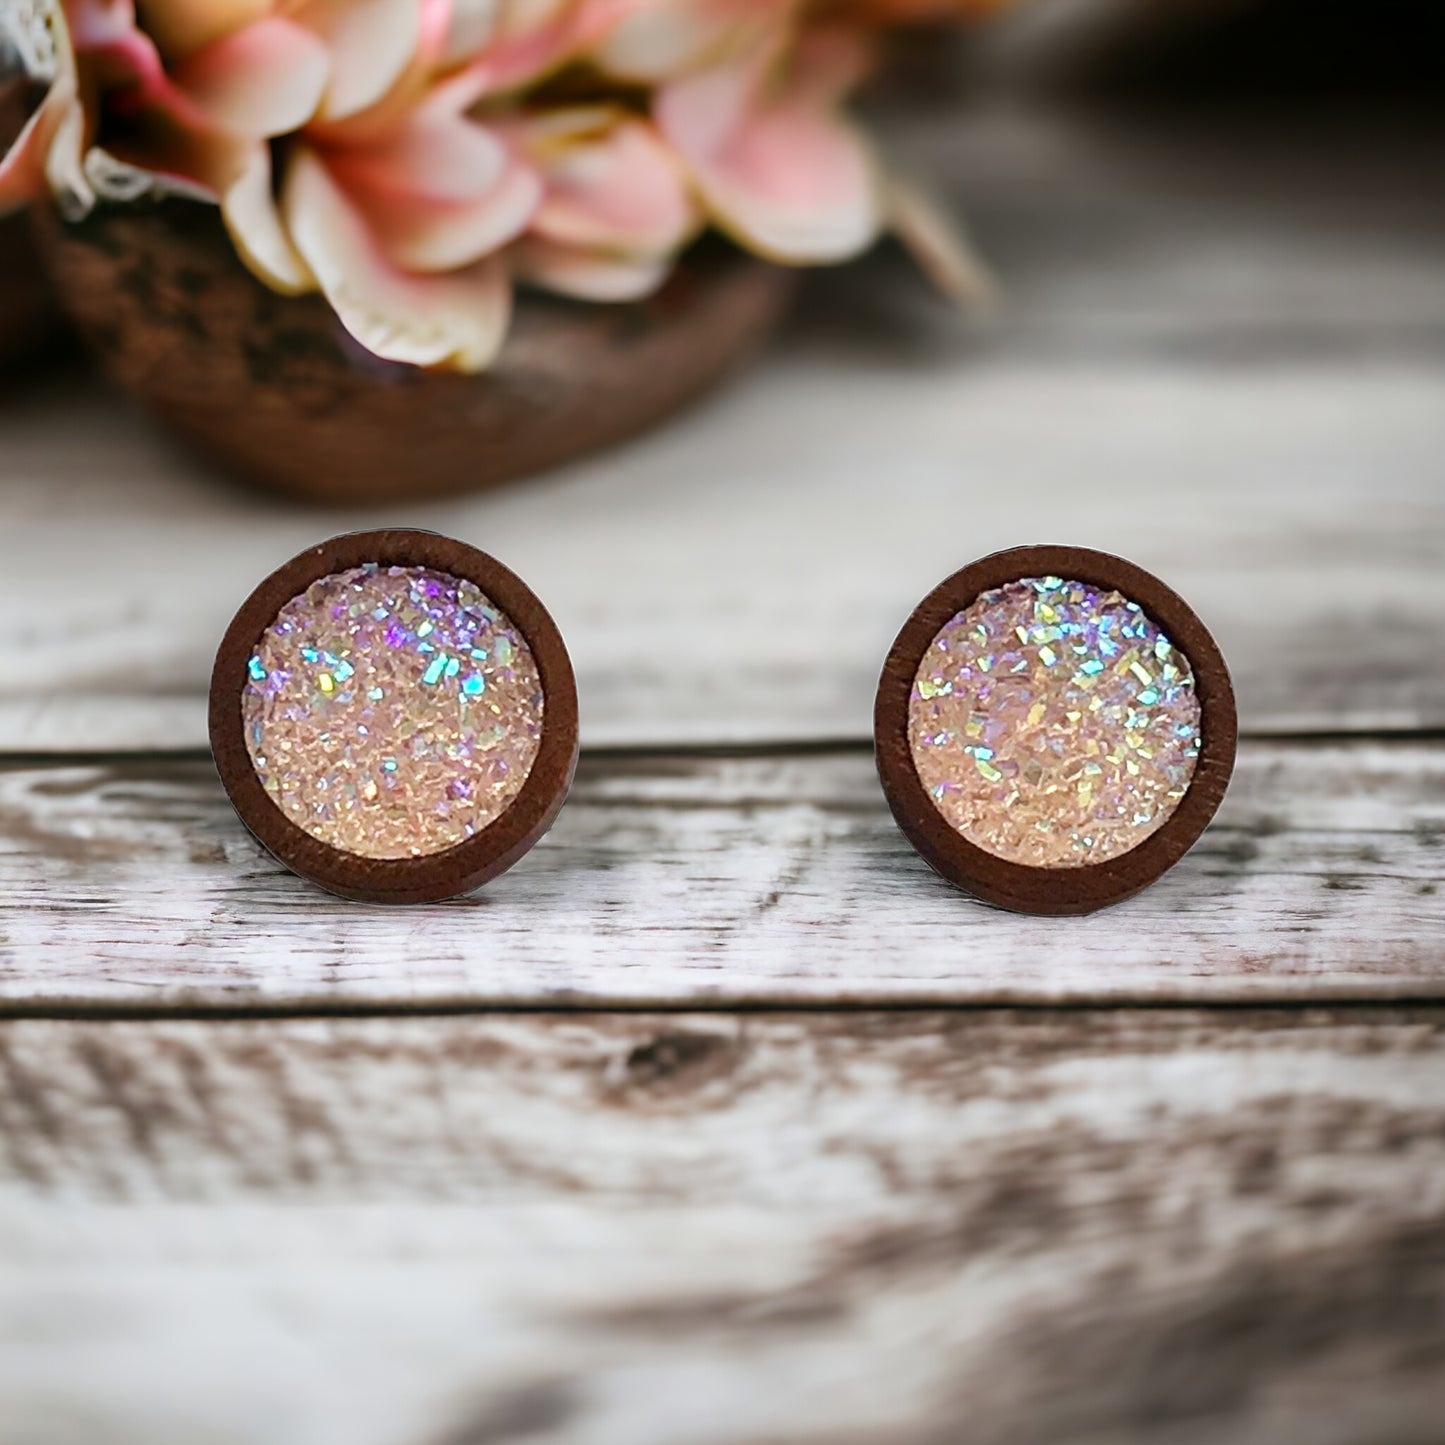 Blush Pink Druzy Earrings - Boho Chic Studs with Natural Wood Accents | Statement Jewelry Gifts